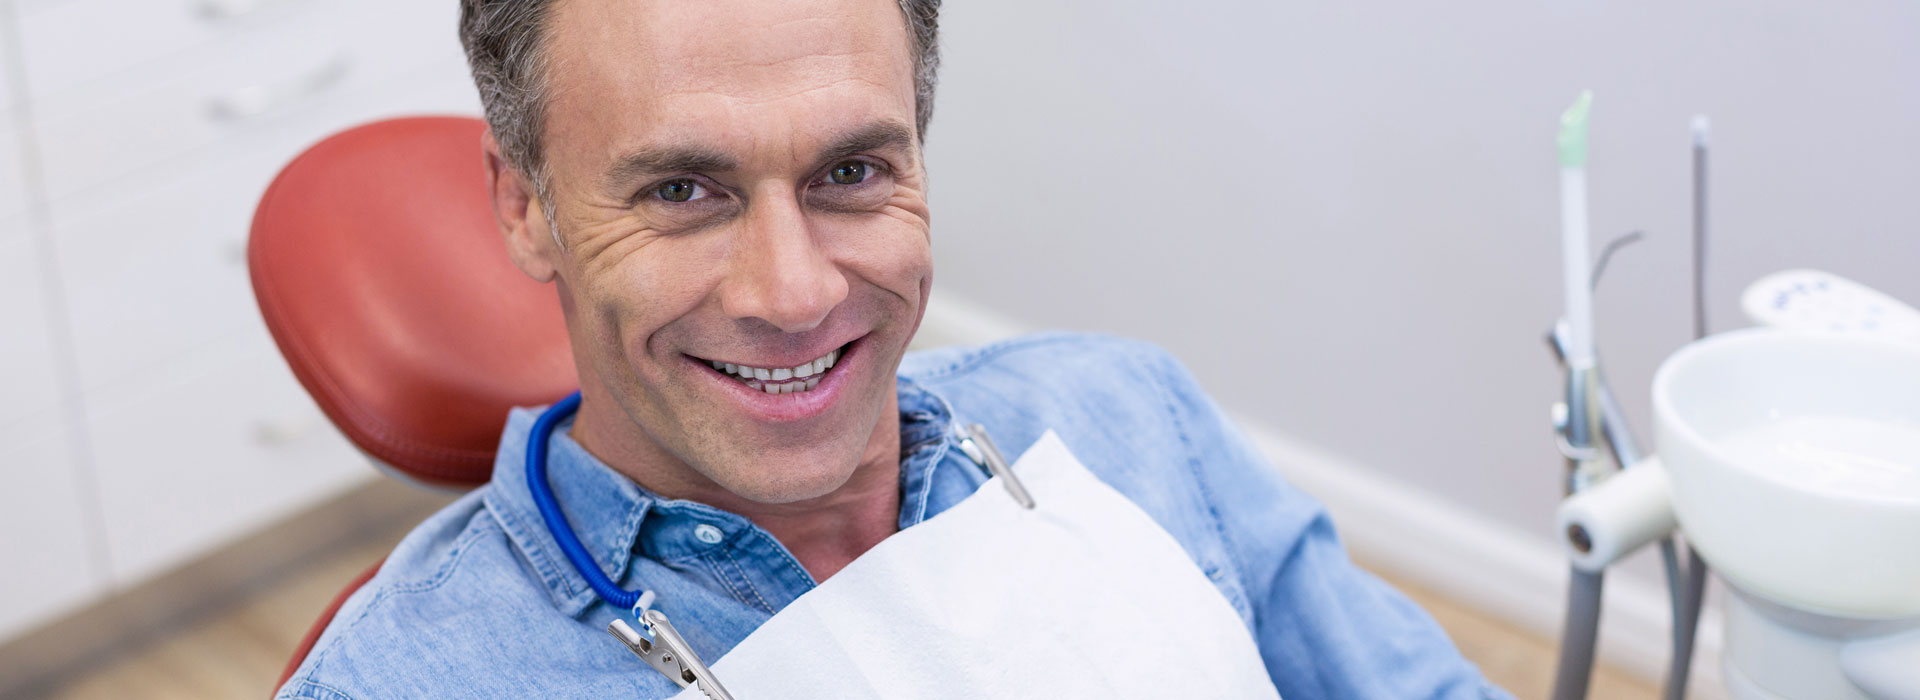 Man getting ready for root canals treatment